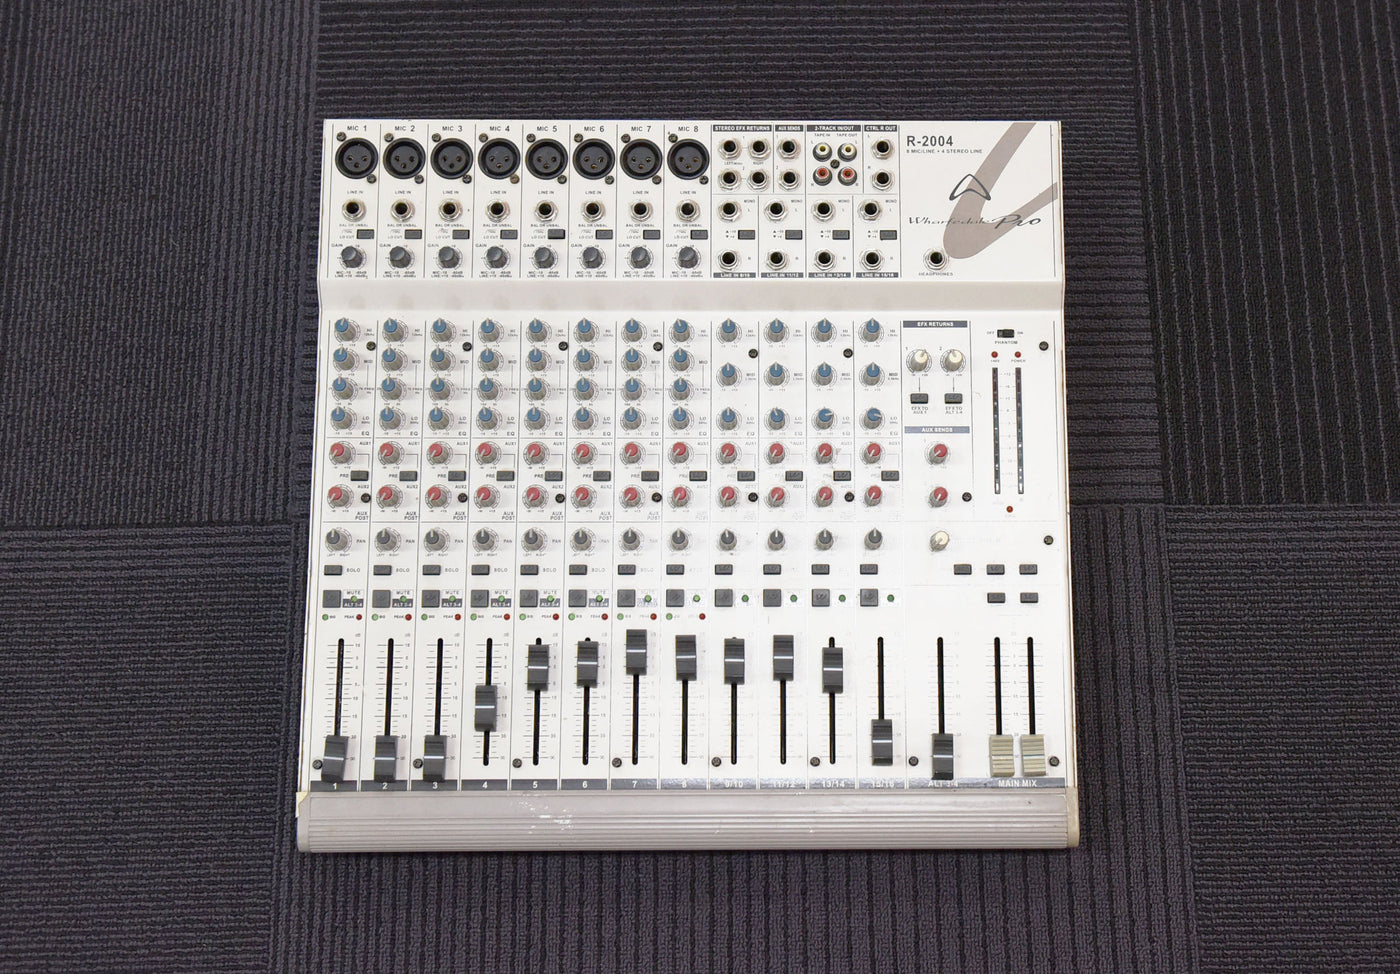 PRO R-2004 8 Mic/Line + 4 Stereo Line Mixer, Recent